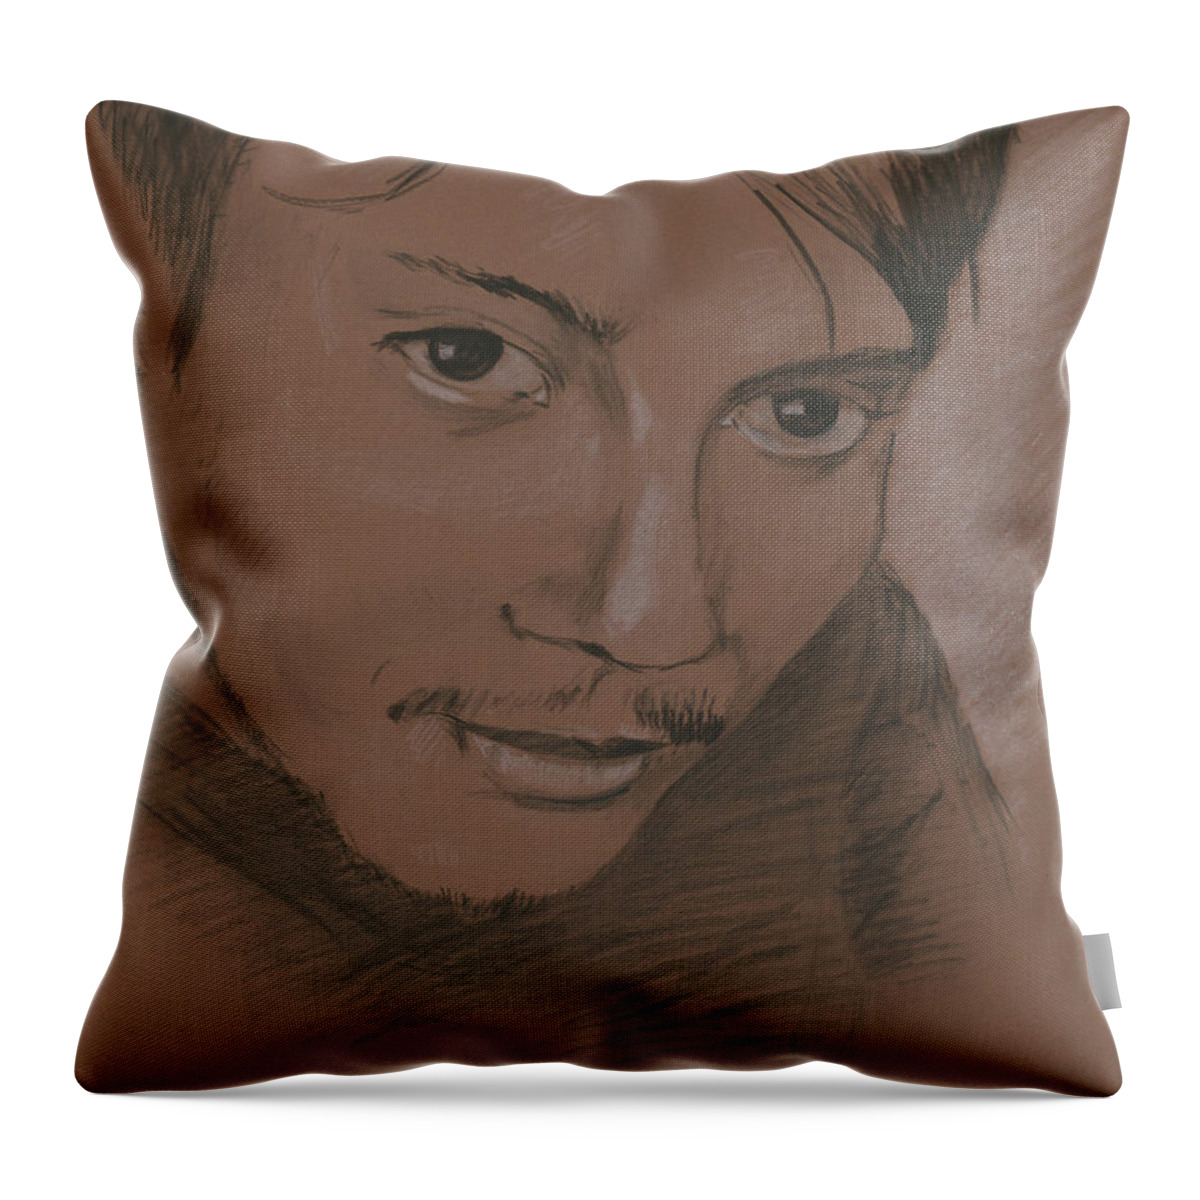 Man Throw Pillow featuring the drawing Portrait of a Stranger by Masha Batkova